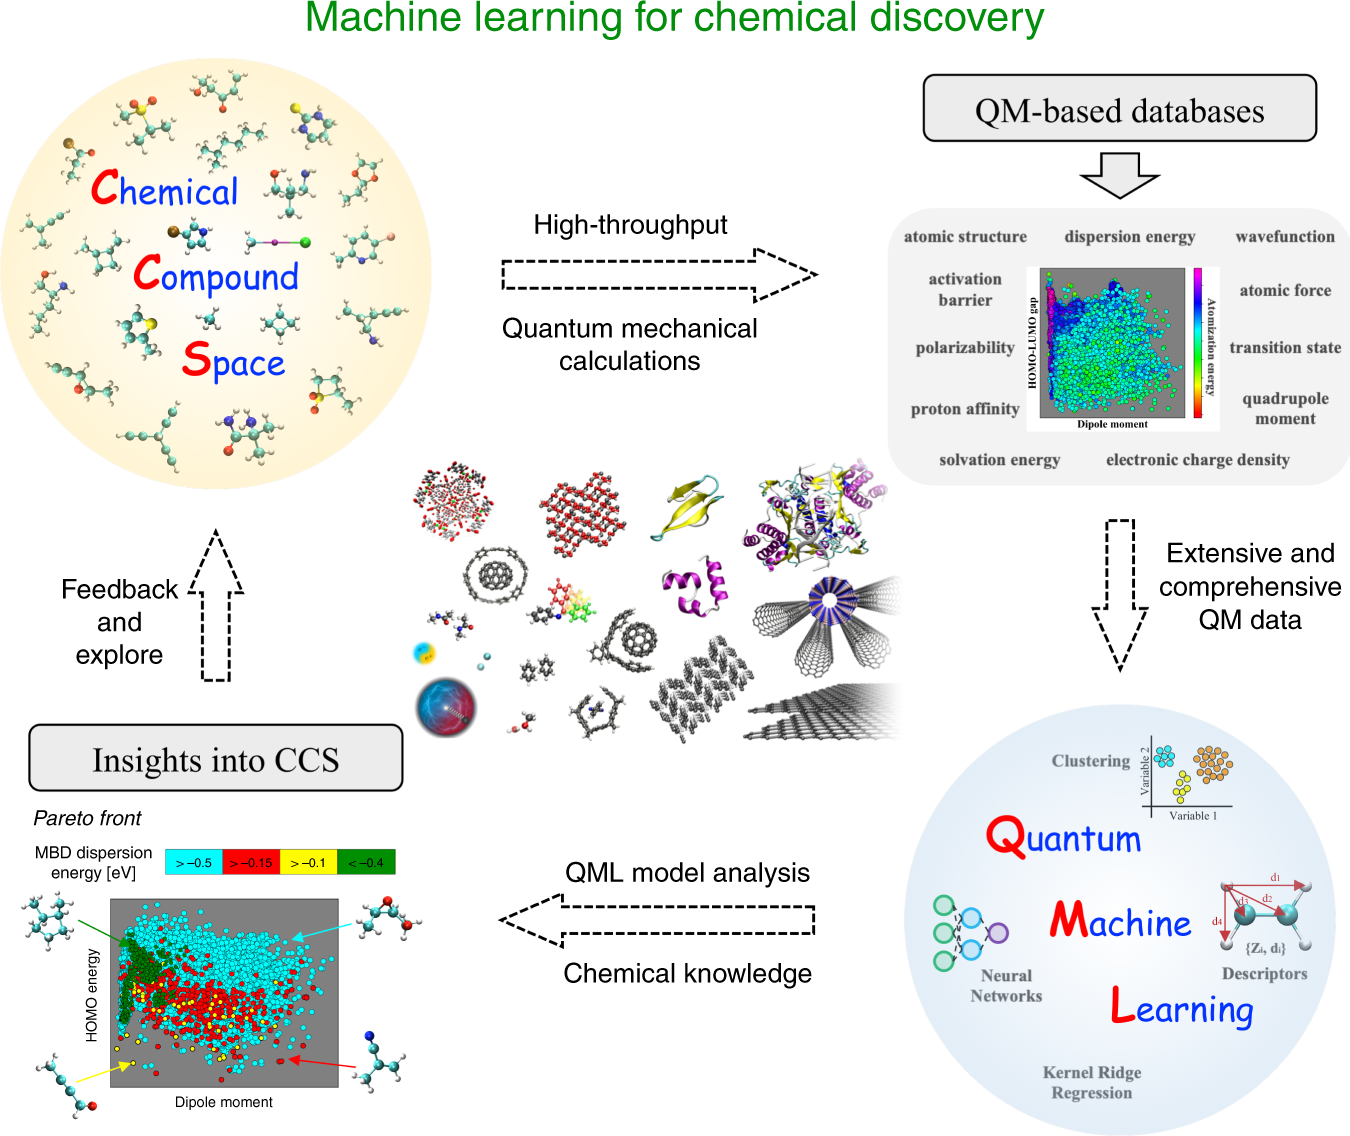 Machine learning for chemical discovery | Nature Communications